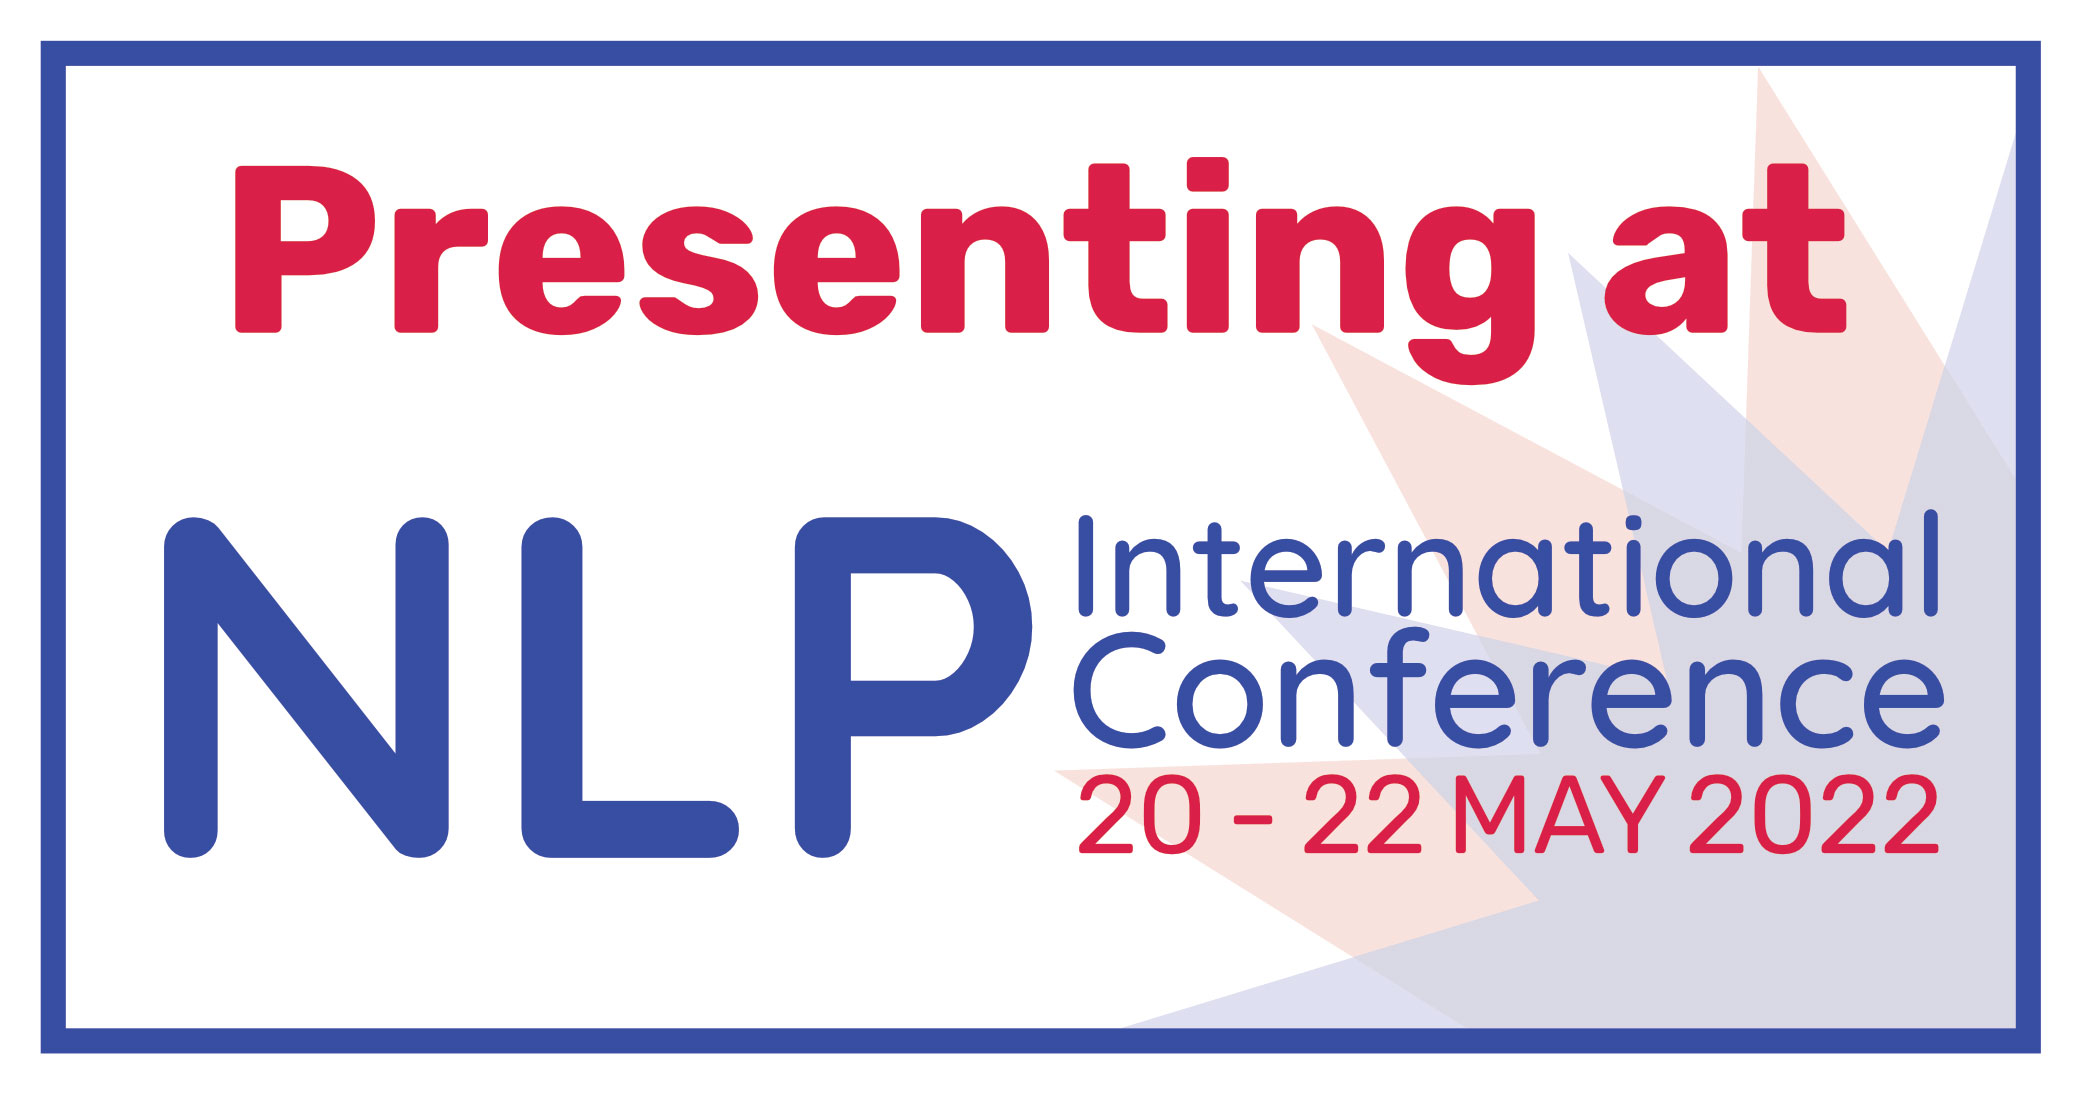 nlp-international-conference-may-2022